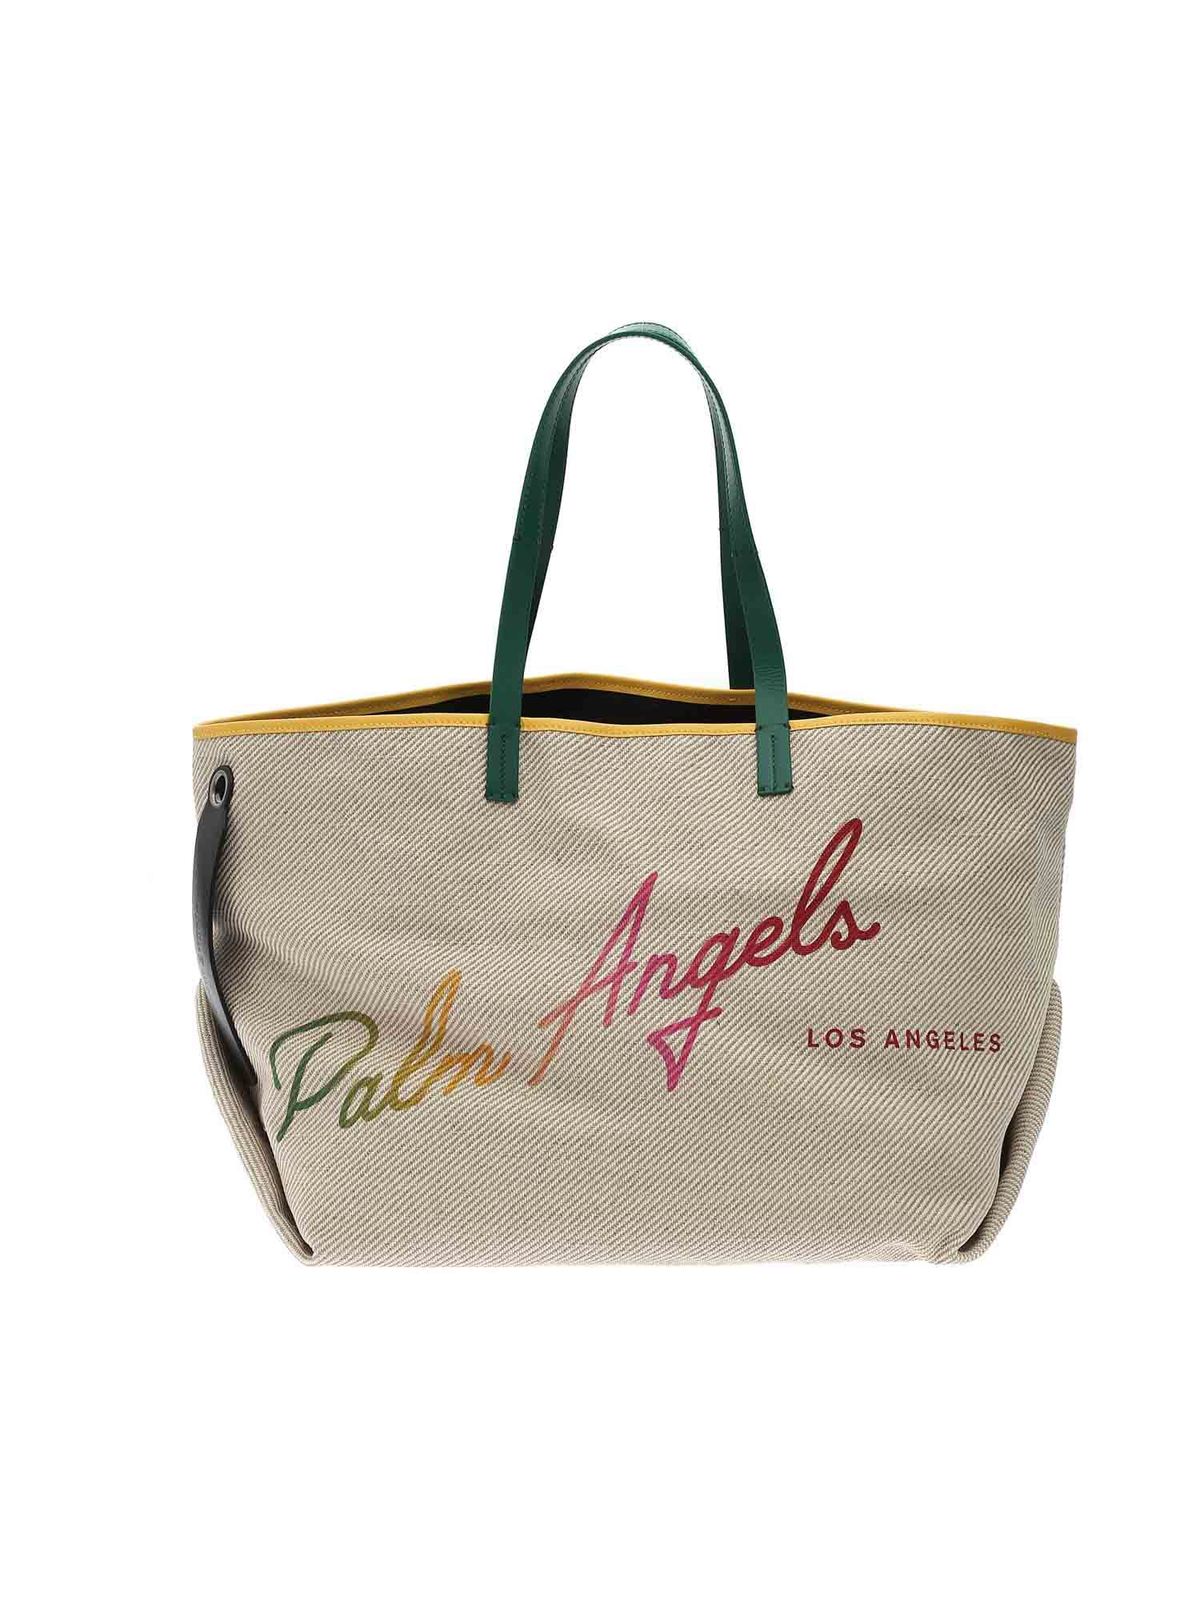 Totes bags Palm Angels - Rainbow bag in beige - PWNA036S21FAB0020384